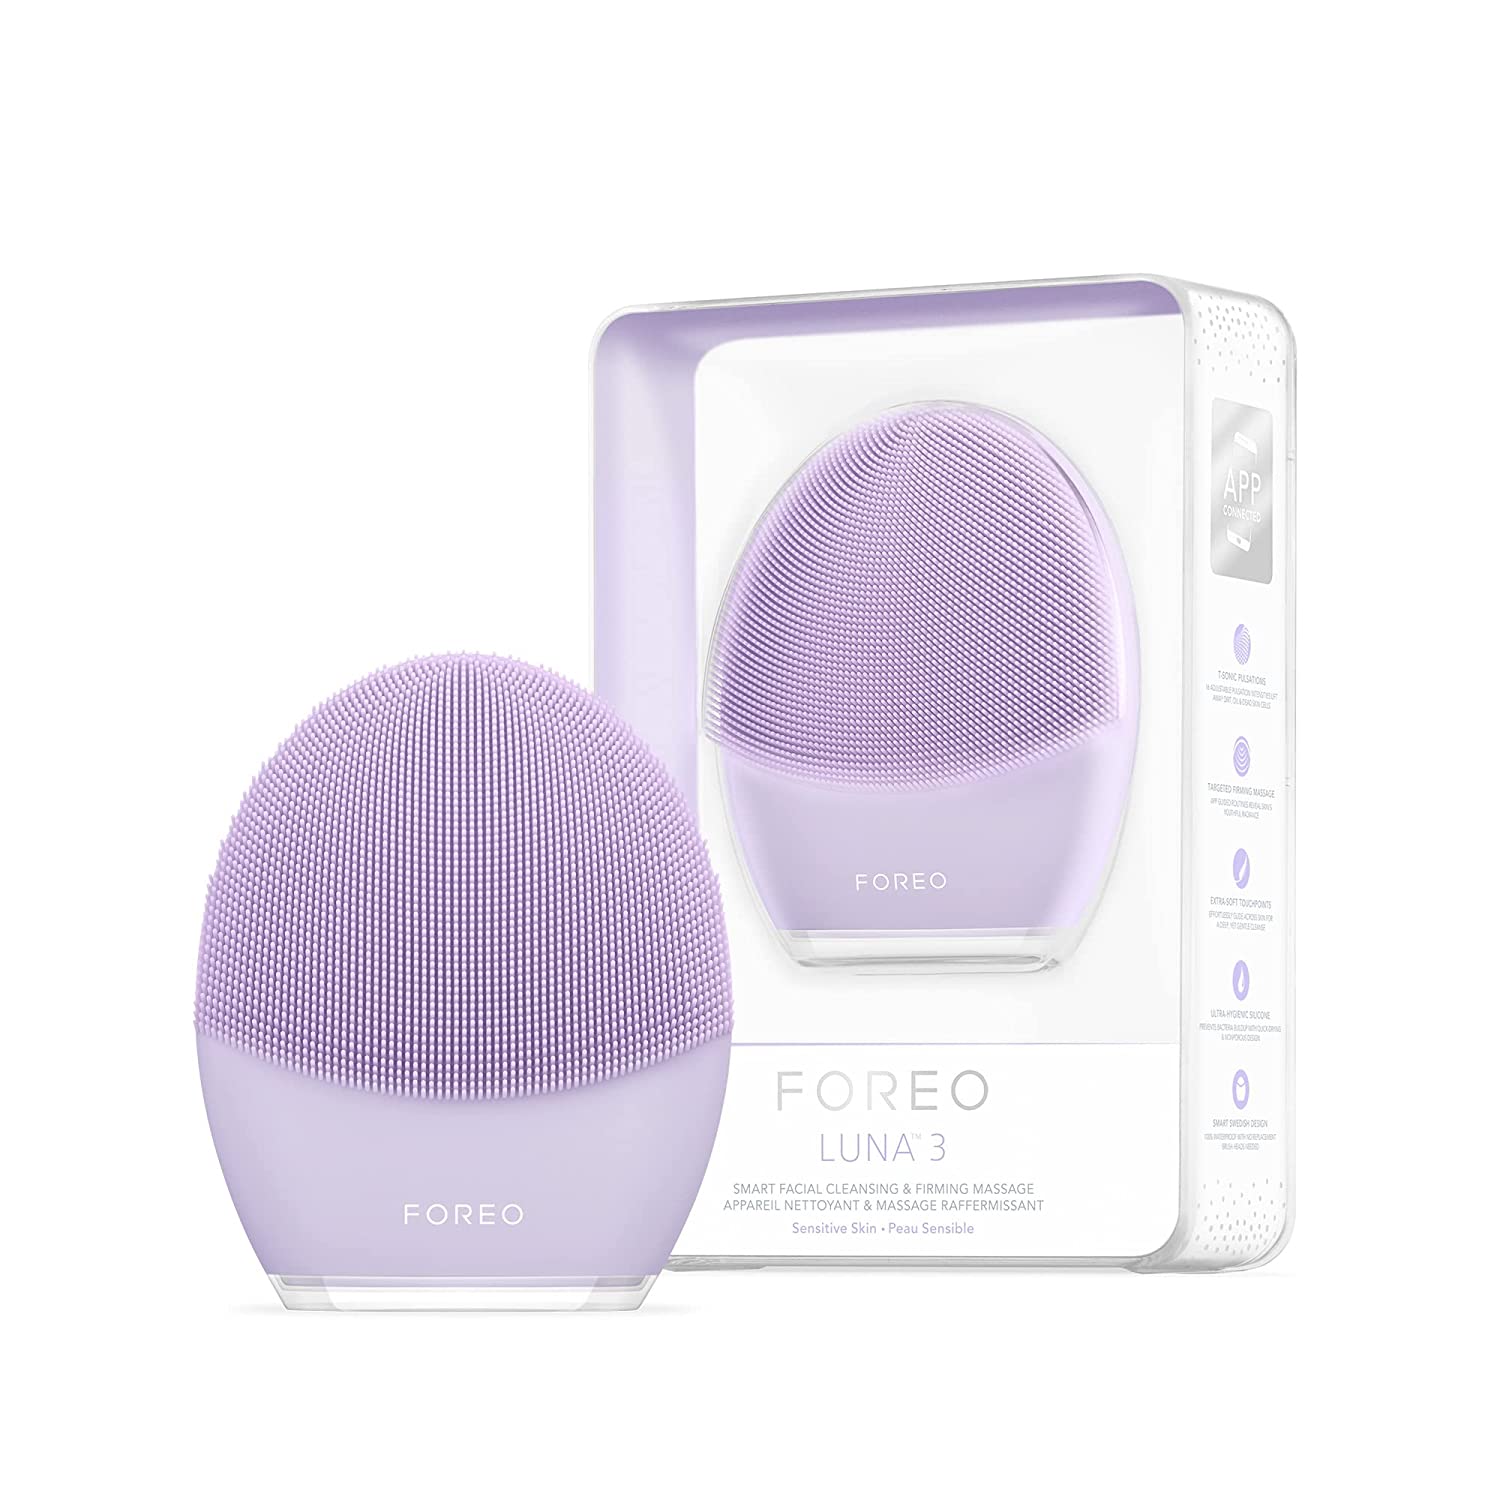 Foreo LUNA 3 Facial Cleansing Brush & Anti Aging Face Massager-0